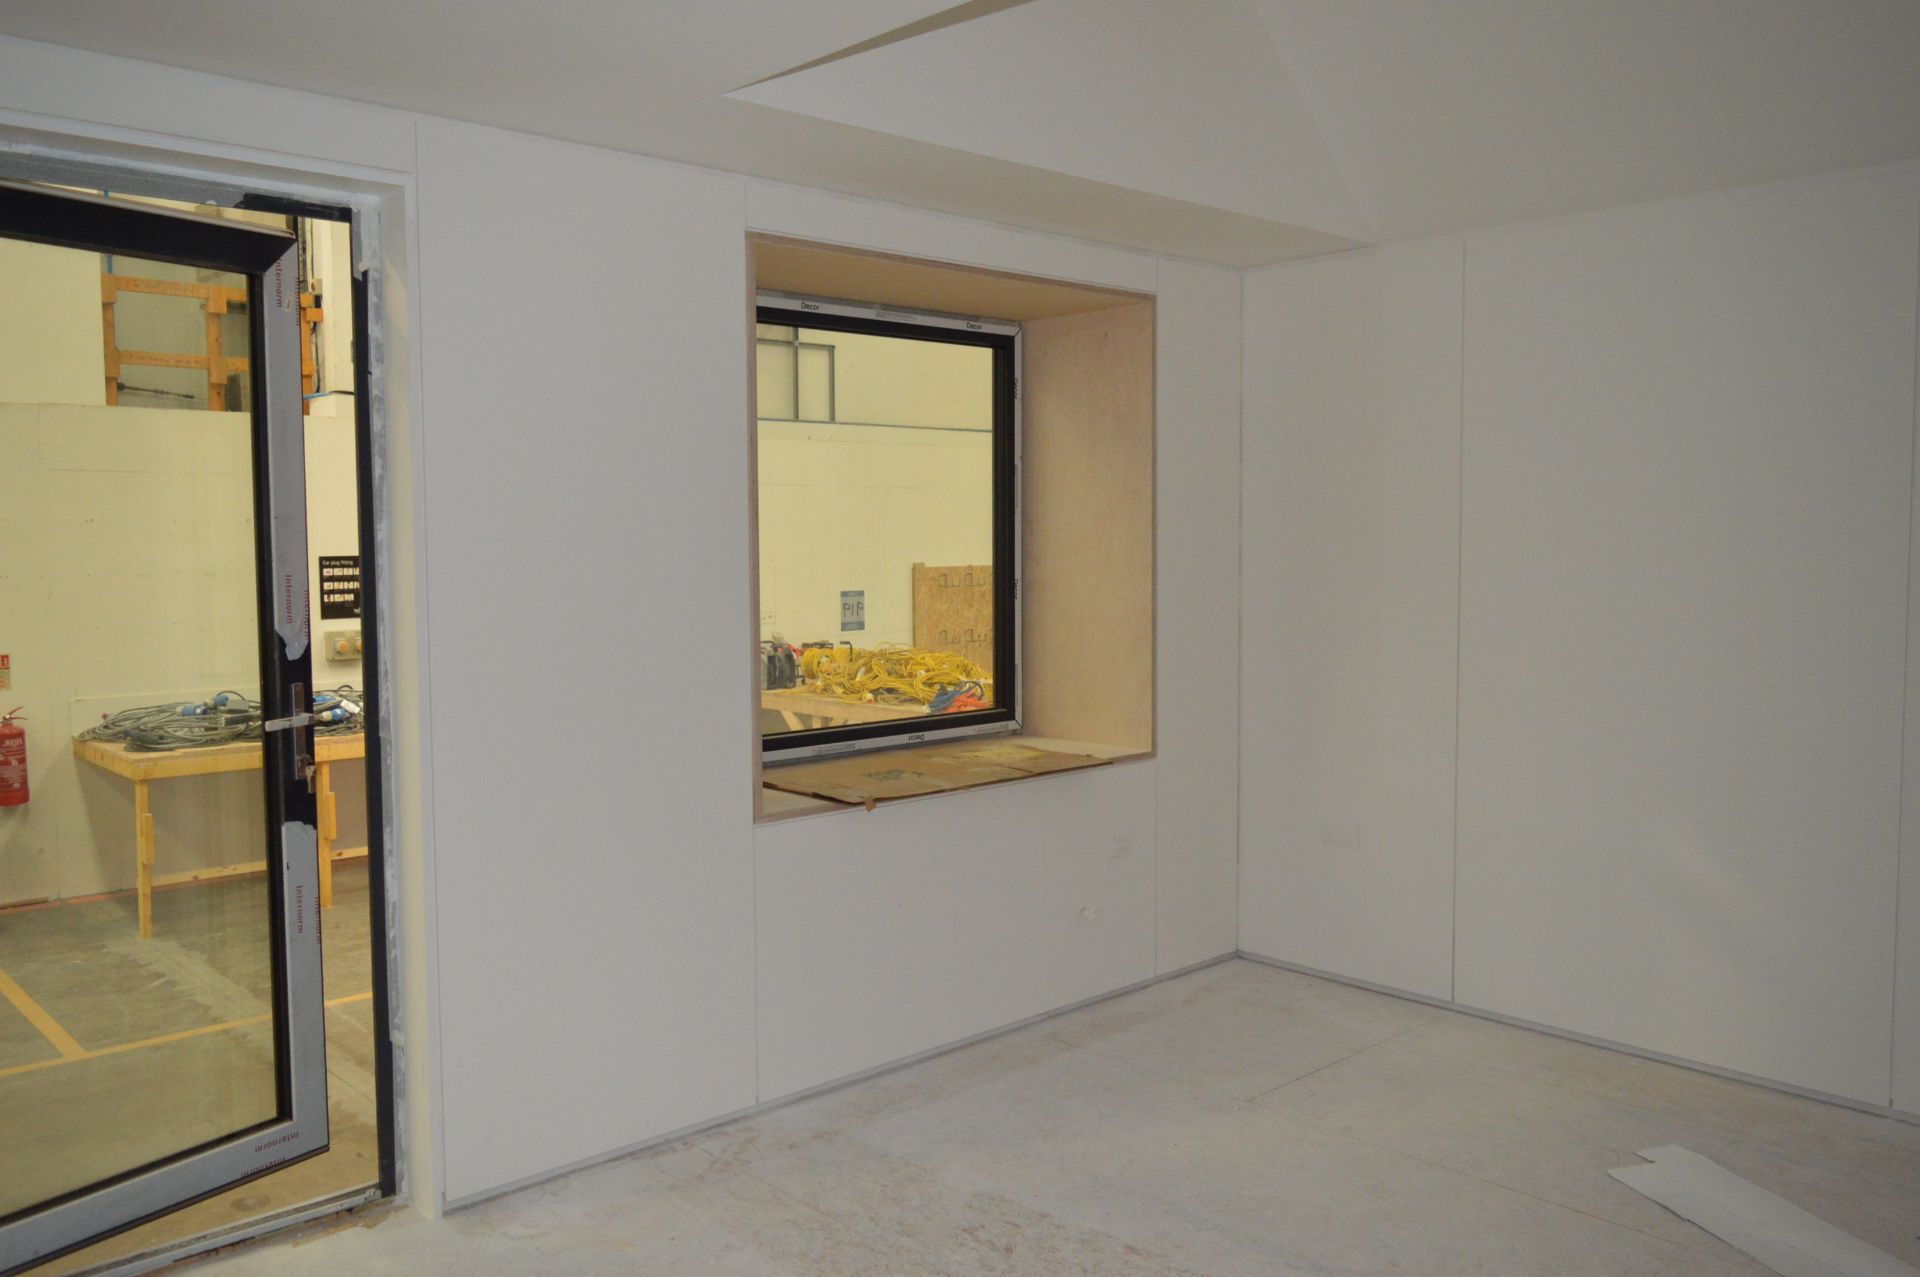 Housing pod with two bedrooms, fitted bathroom, water heater, approx. 10.7m x 5.0m x 3.3m high - Image 5 of 8